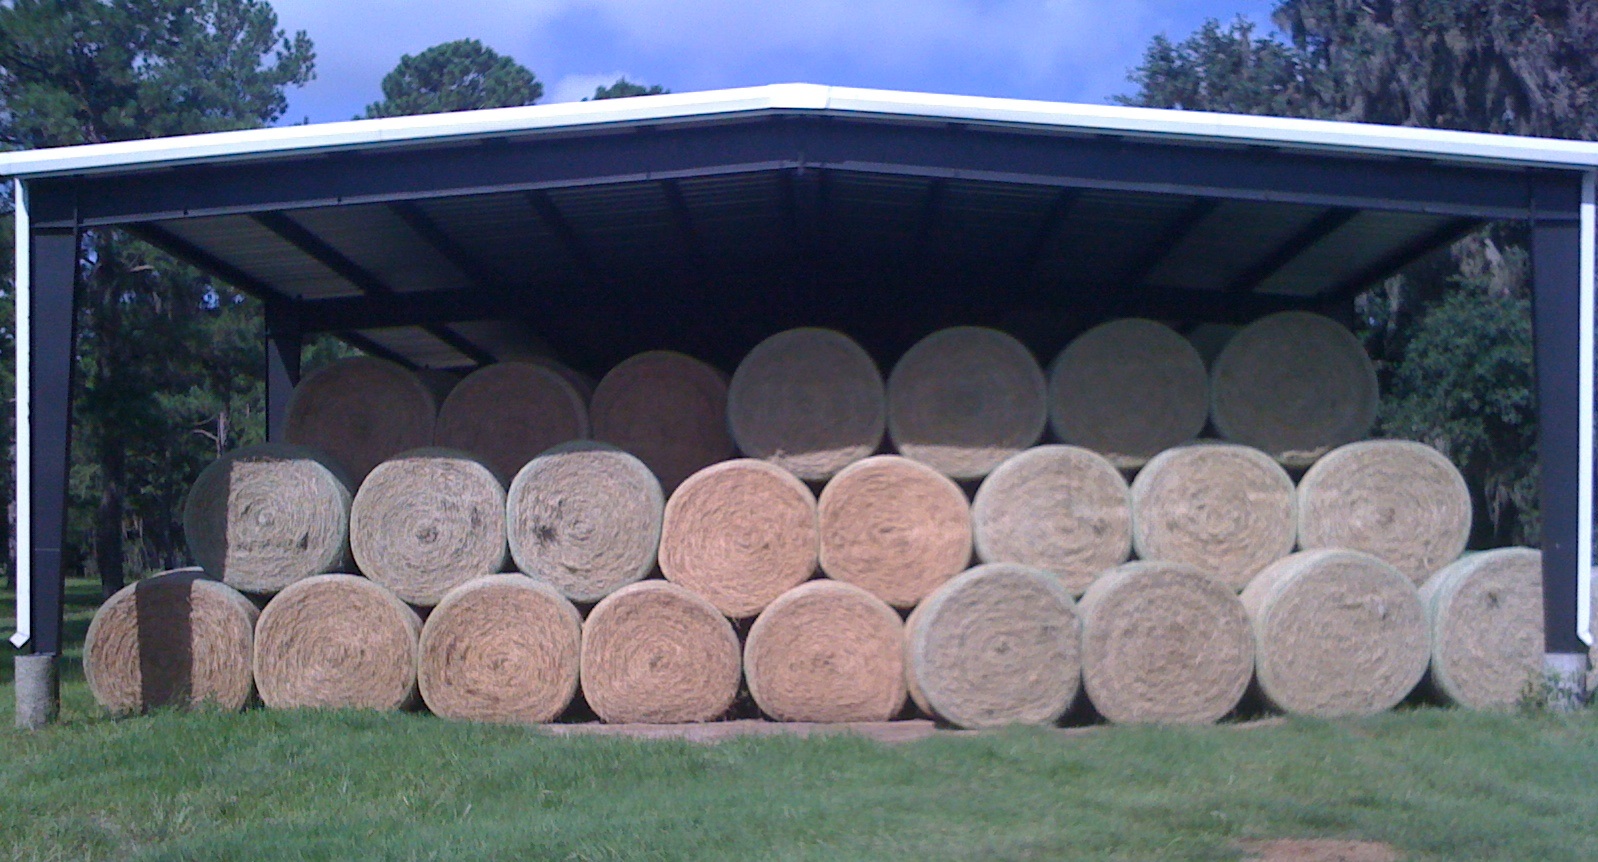 Well-made, dense hay bales maintain their quality during storage and decrease the amount of wasted hay and dollars during the winter feeding period. (Alachua, Florida)